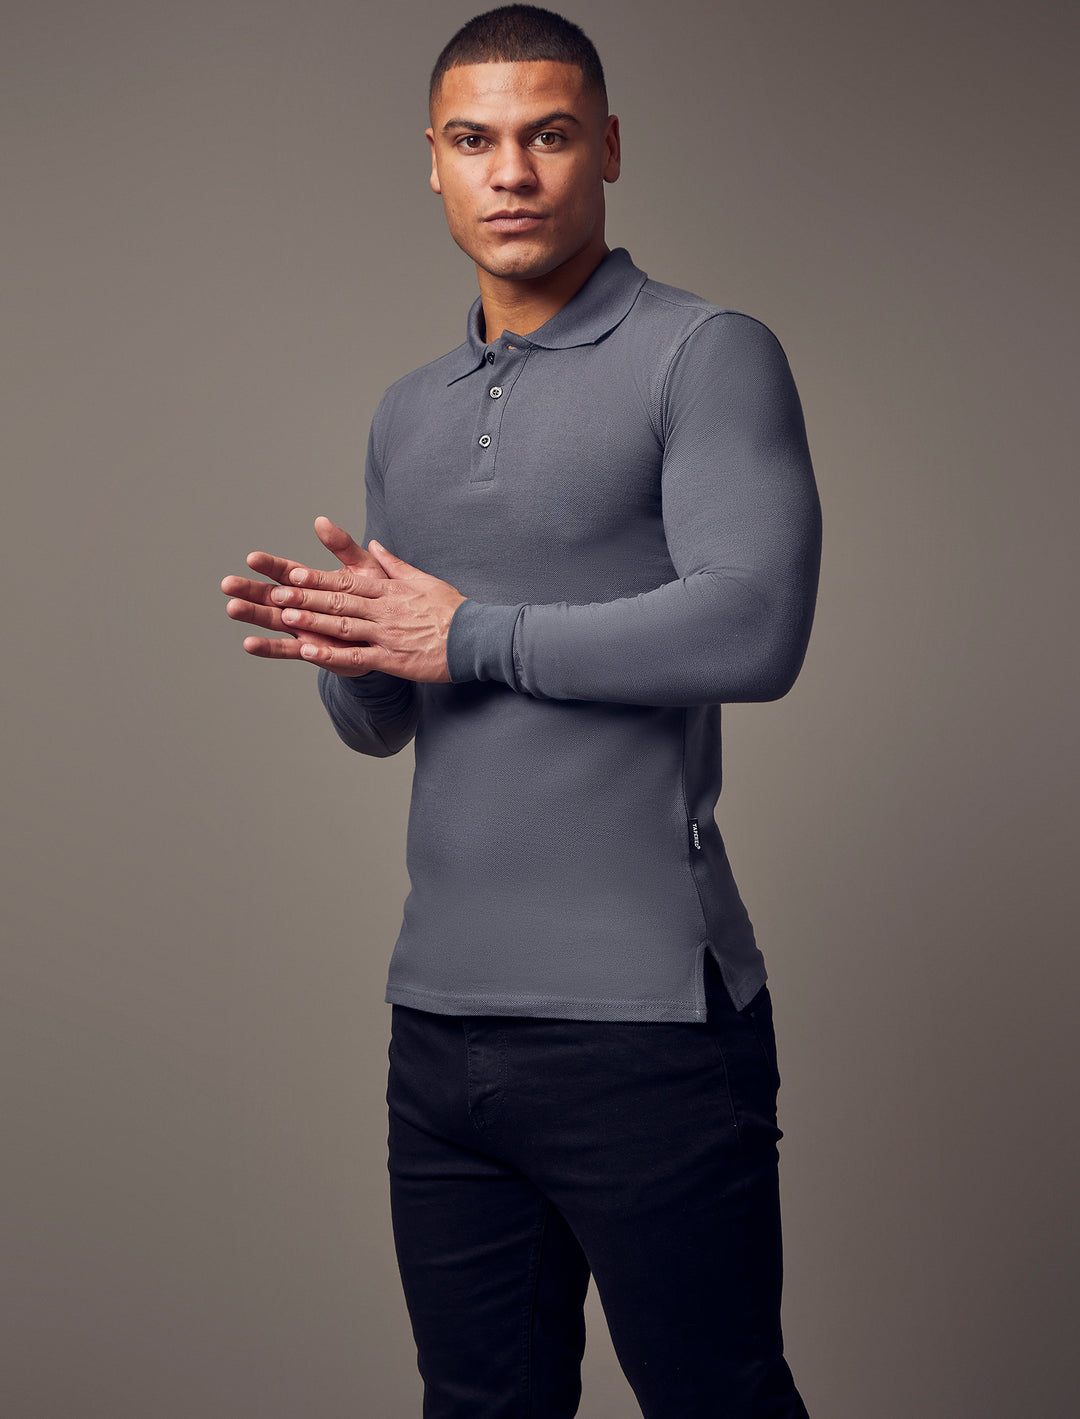  Dark grey, long-sleeve polo shirt with a tapered fit from Tapered Menswear, featuring a muscle-fit design to create a sleek and comfortable silhouette.